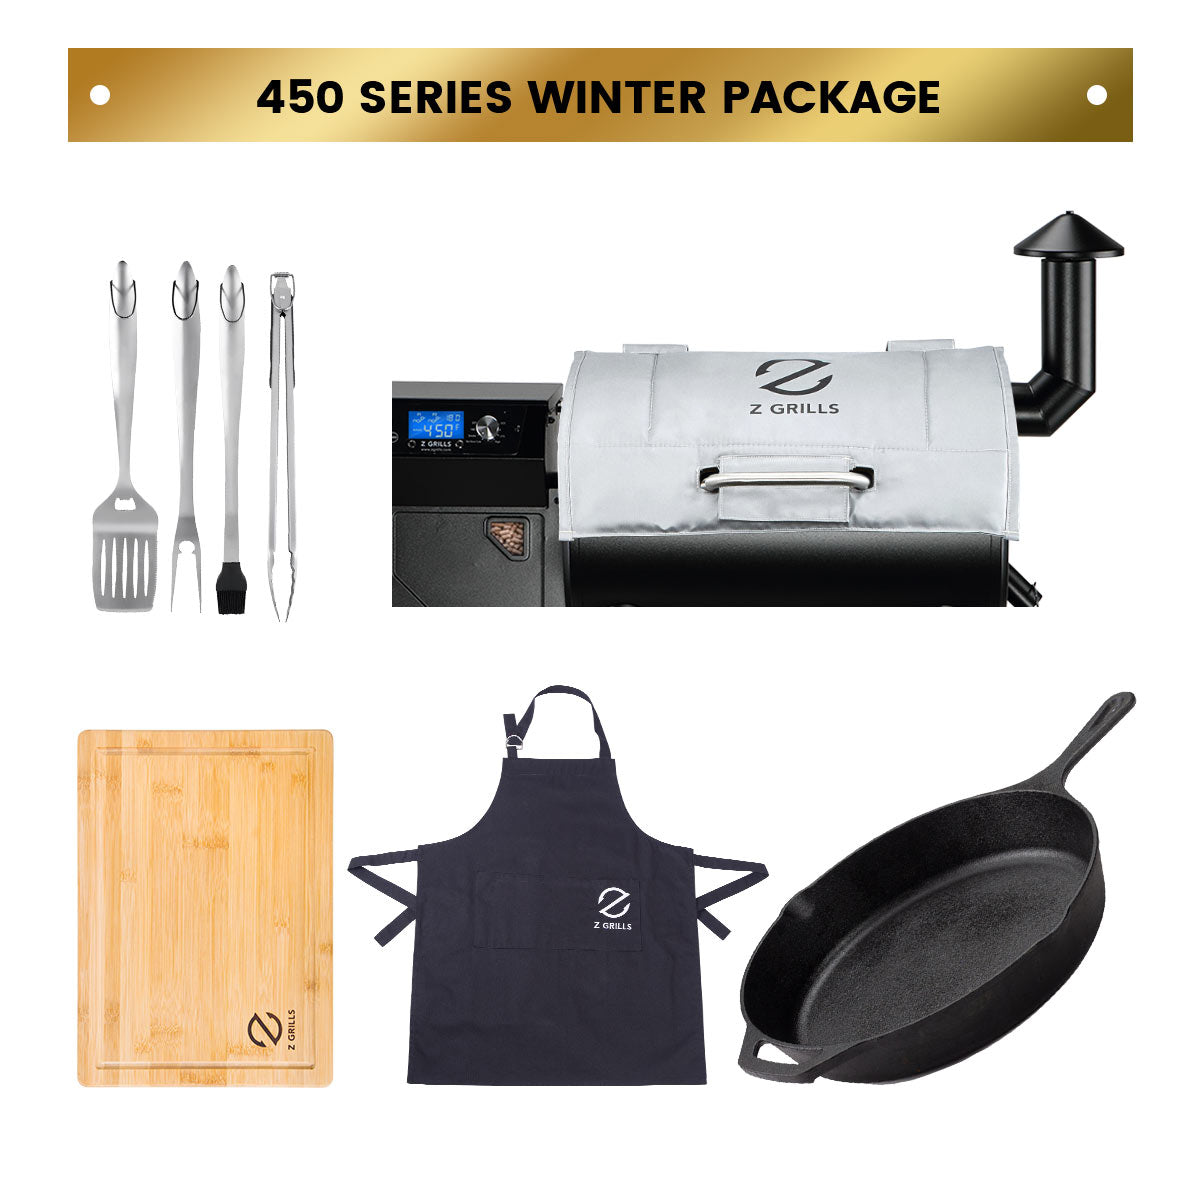 WINTER GRILLING PACKAGE